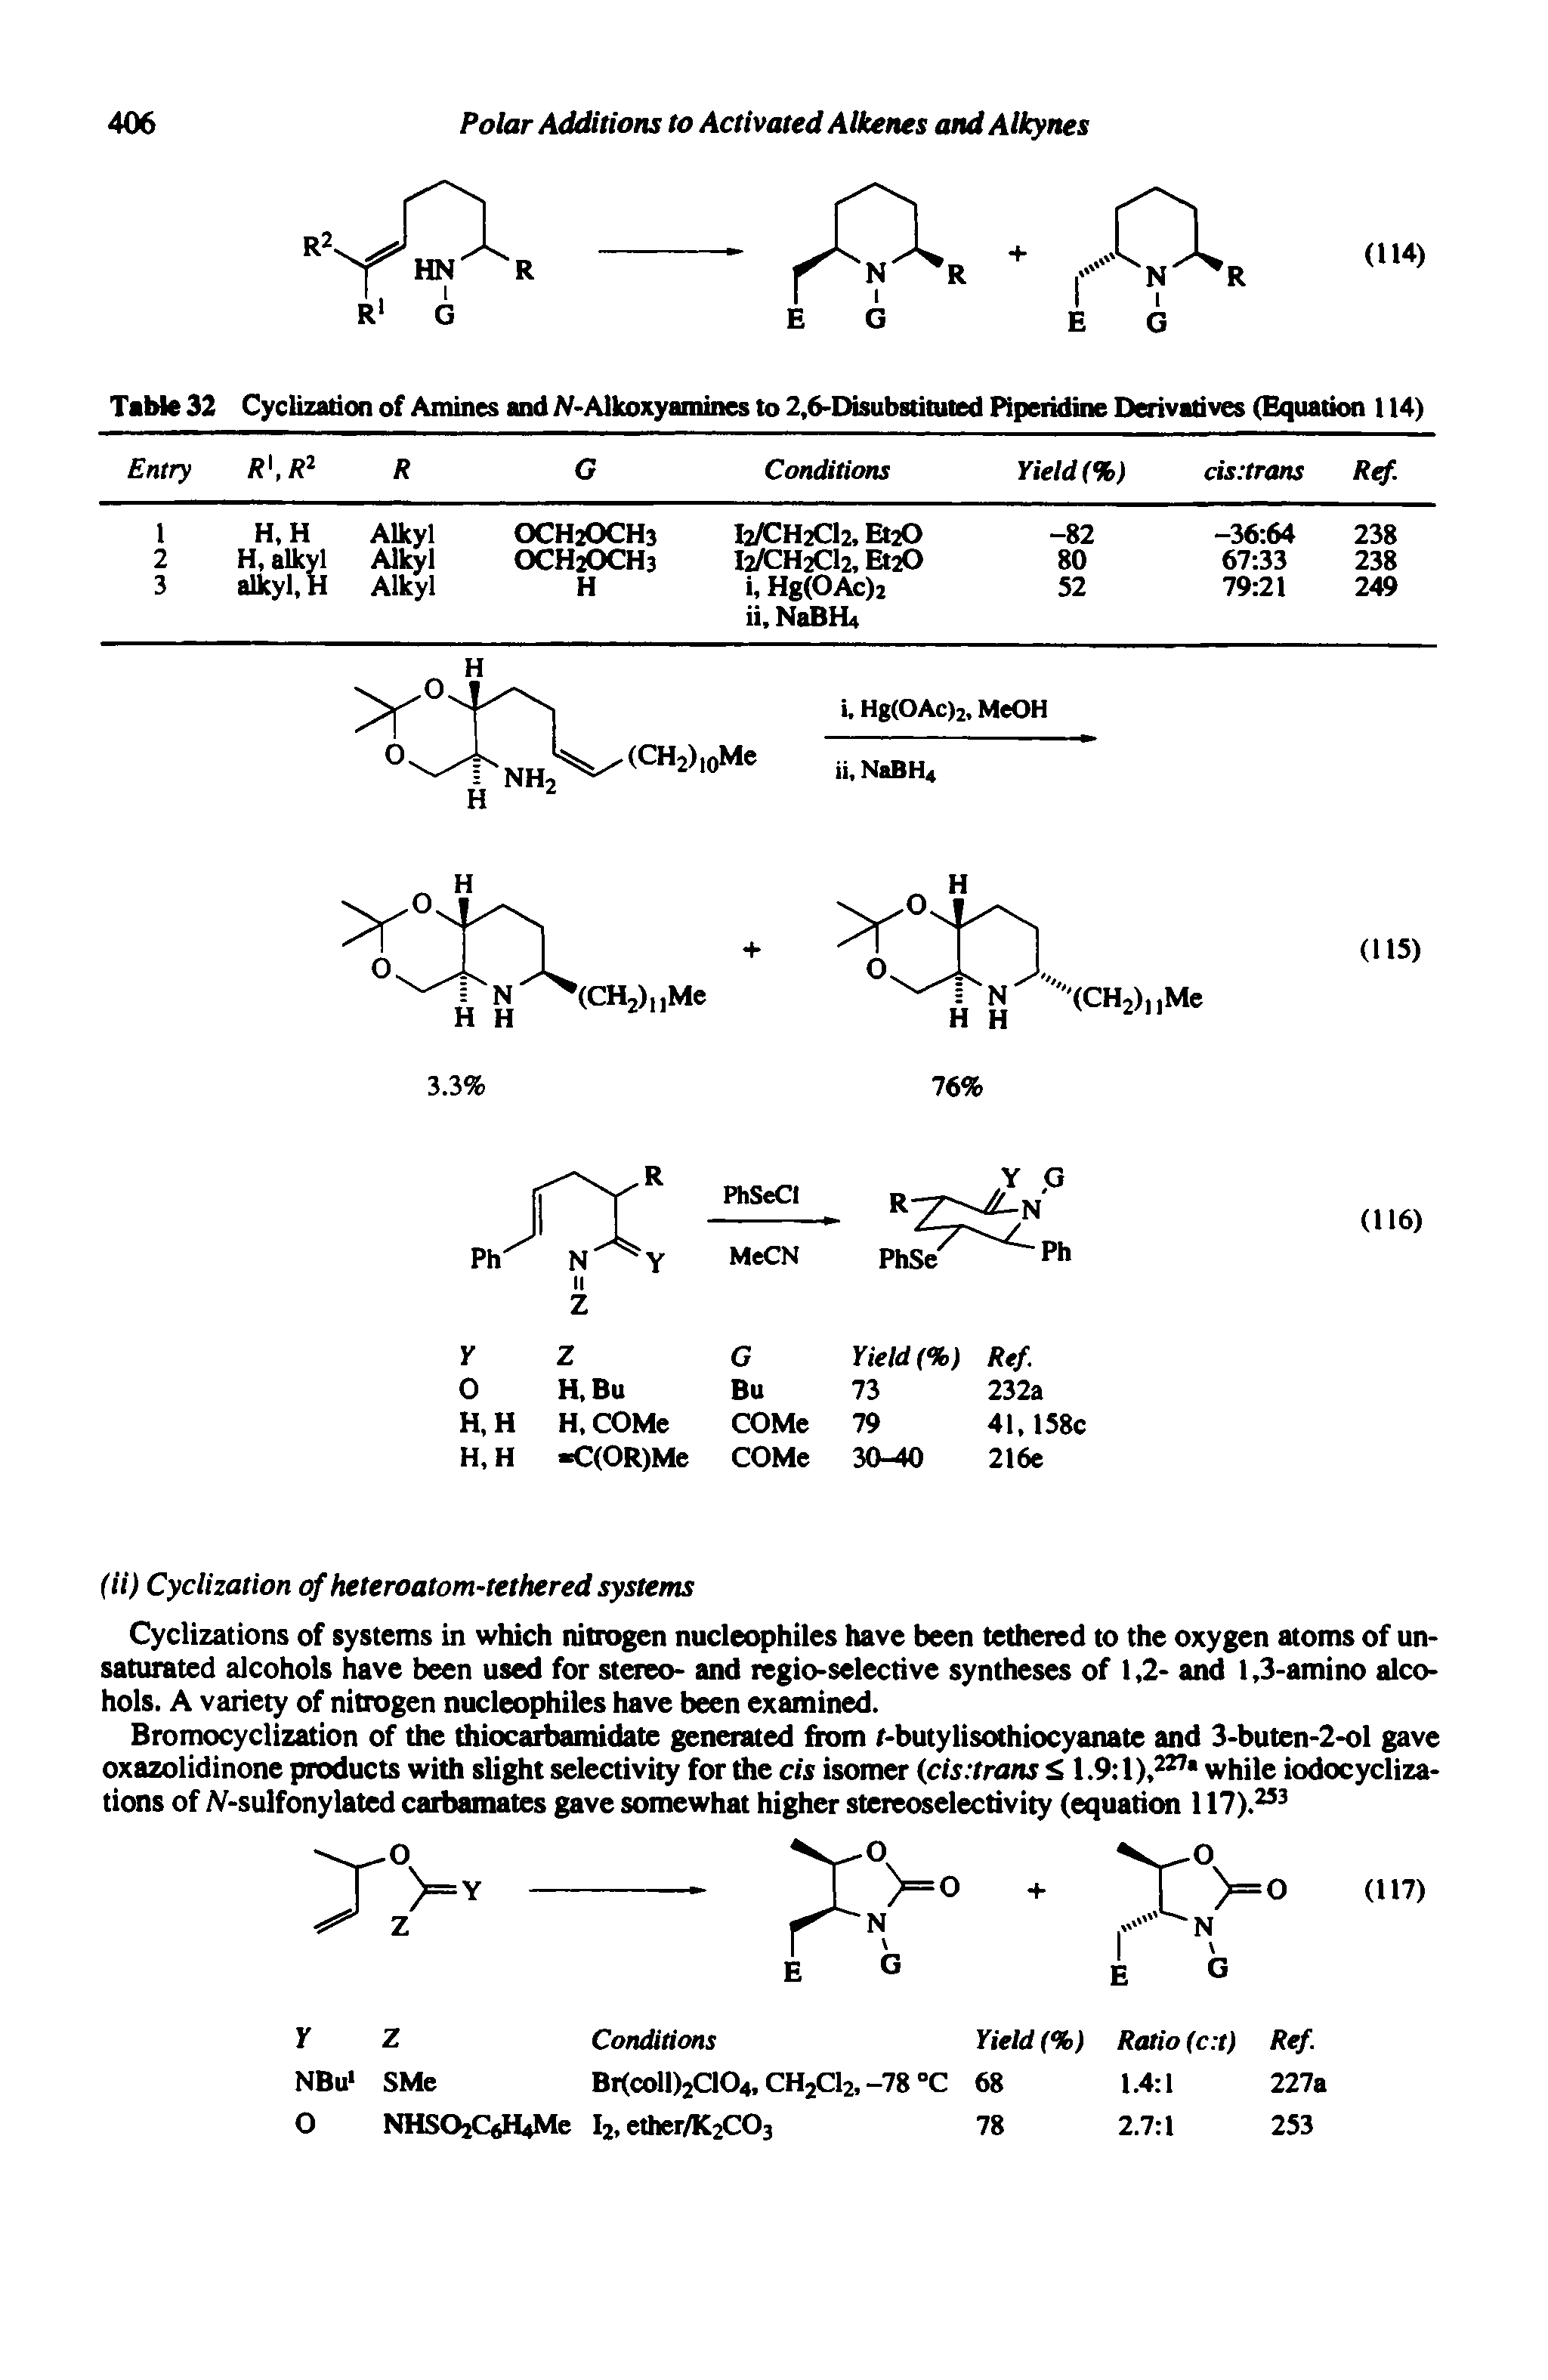 Table 32 Cyclization of Amines and N-Alkoxyamines to 2,6-Disubstituted Piperidine Derivatives (Equation 114)...